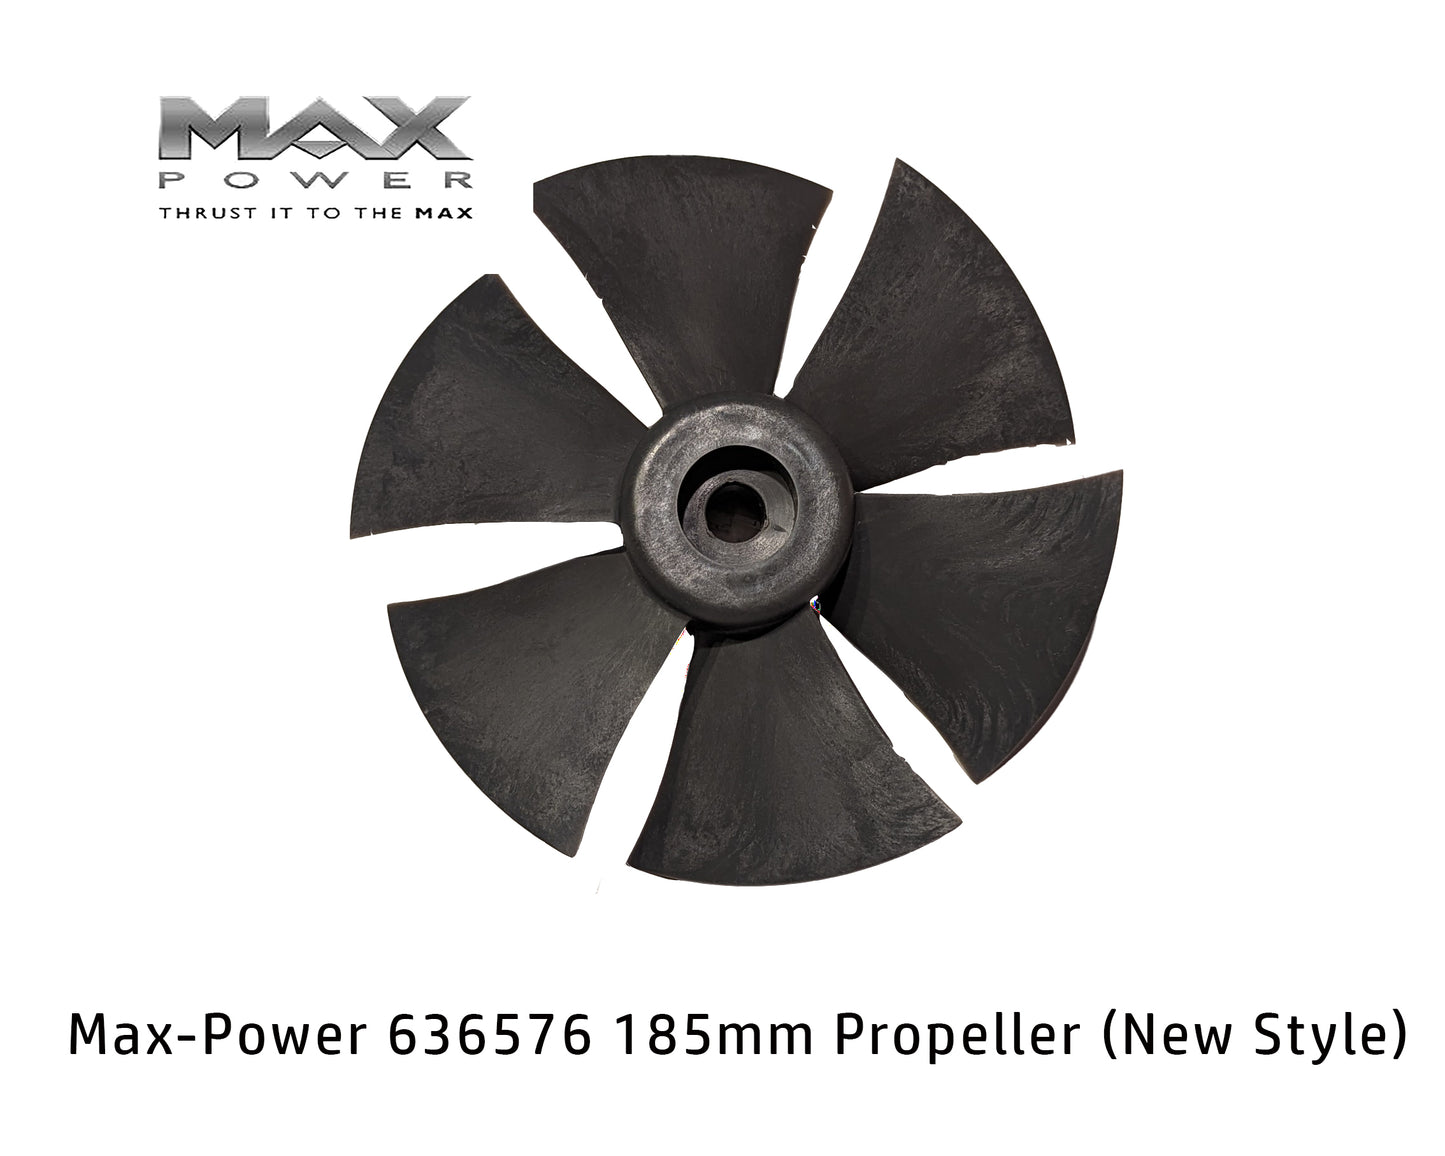 Max Power 185mm Propeller (New Style) PN 636576